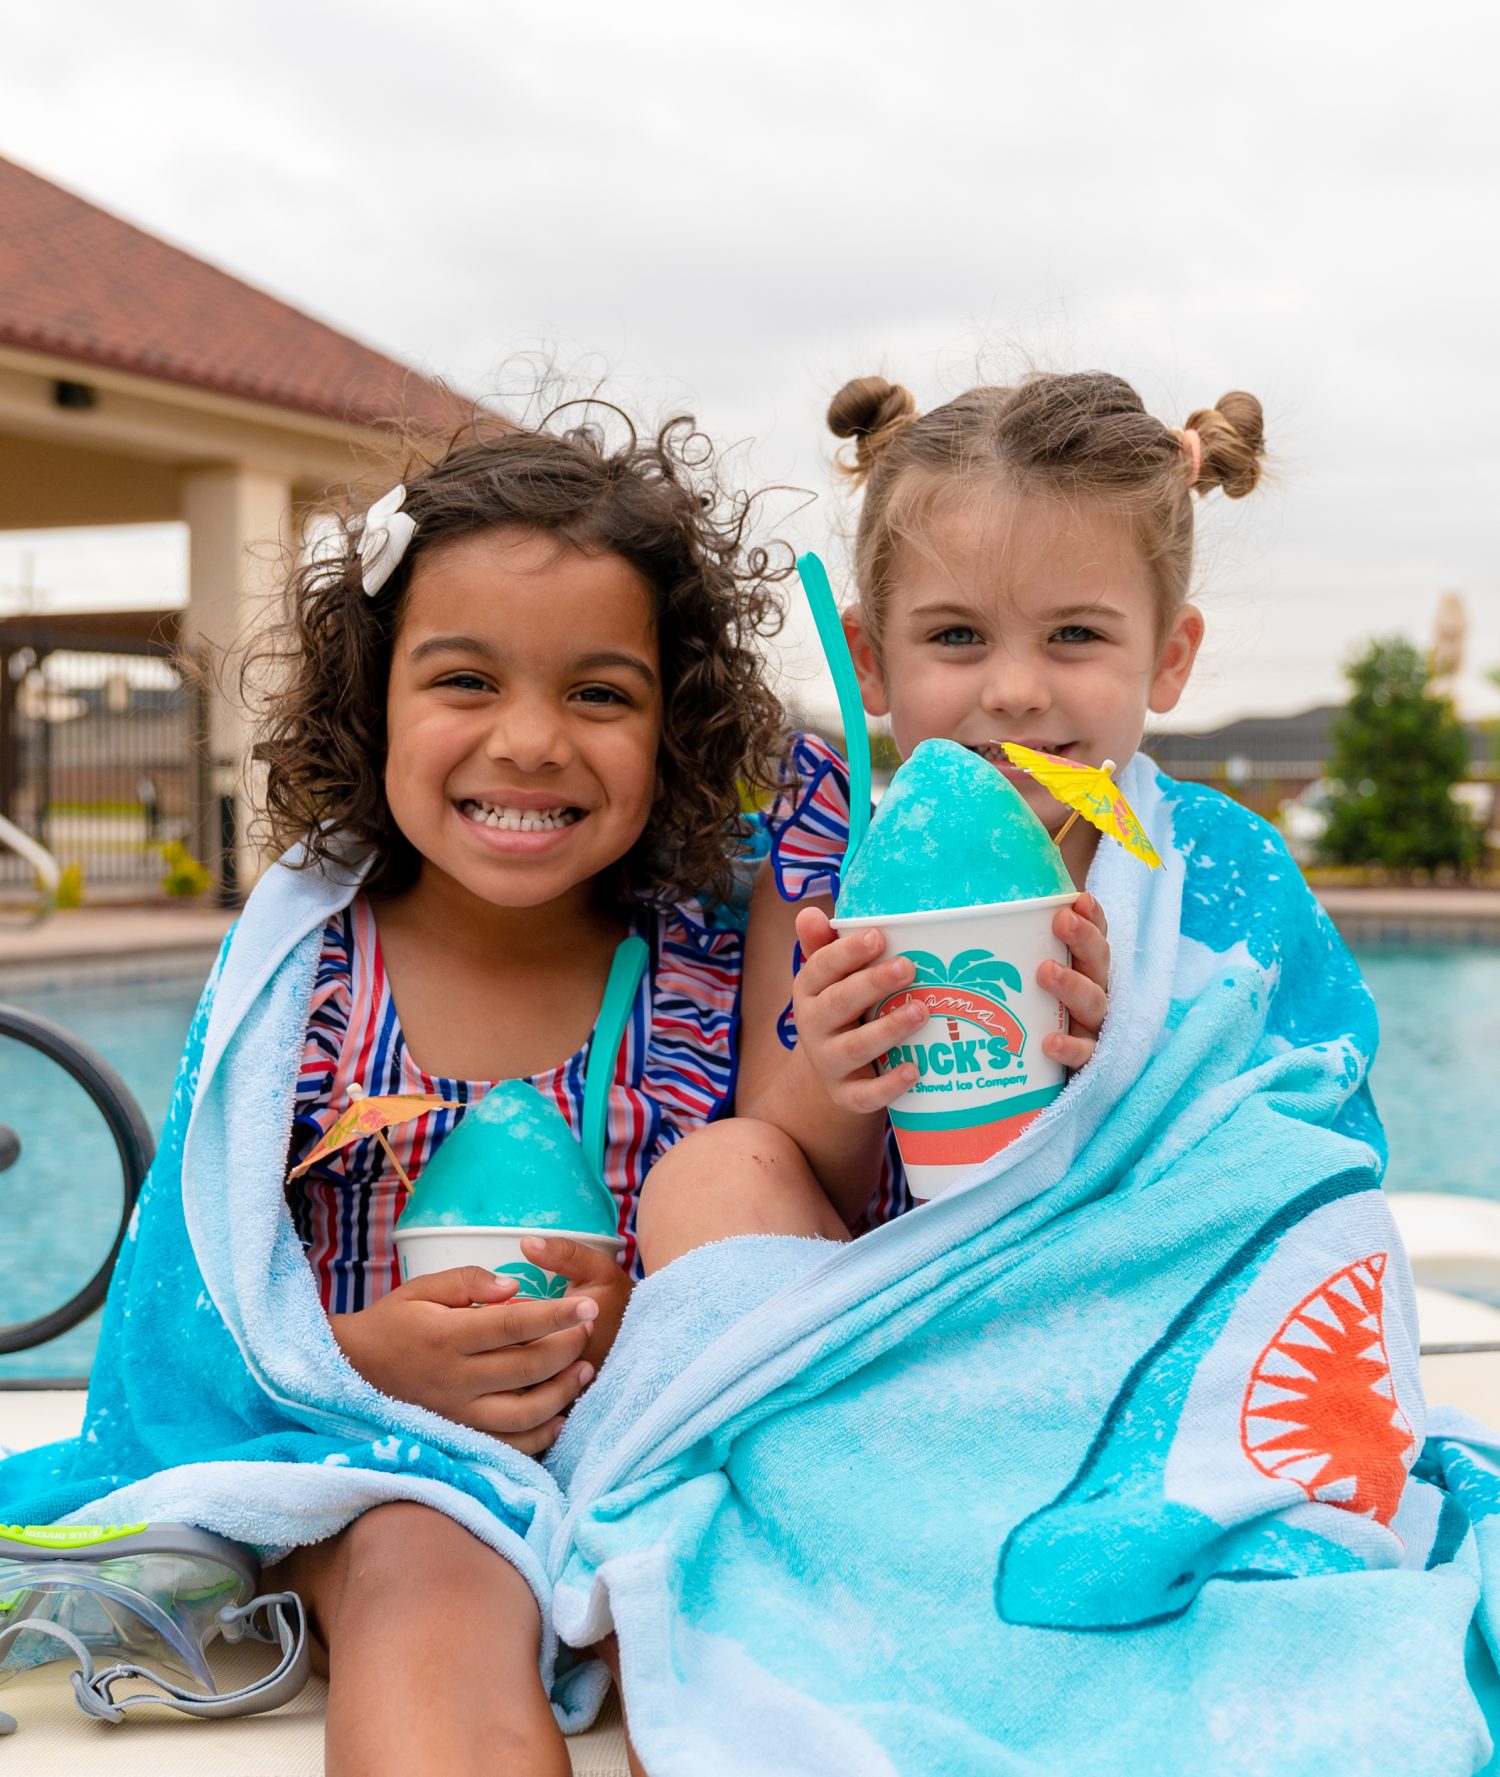 Two girls by the pool enjoying the Shark Attack Sno from Bahama Buck's.